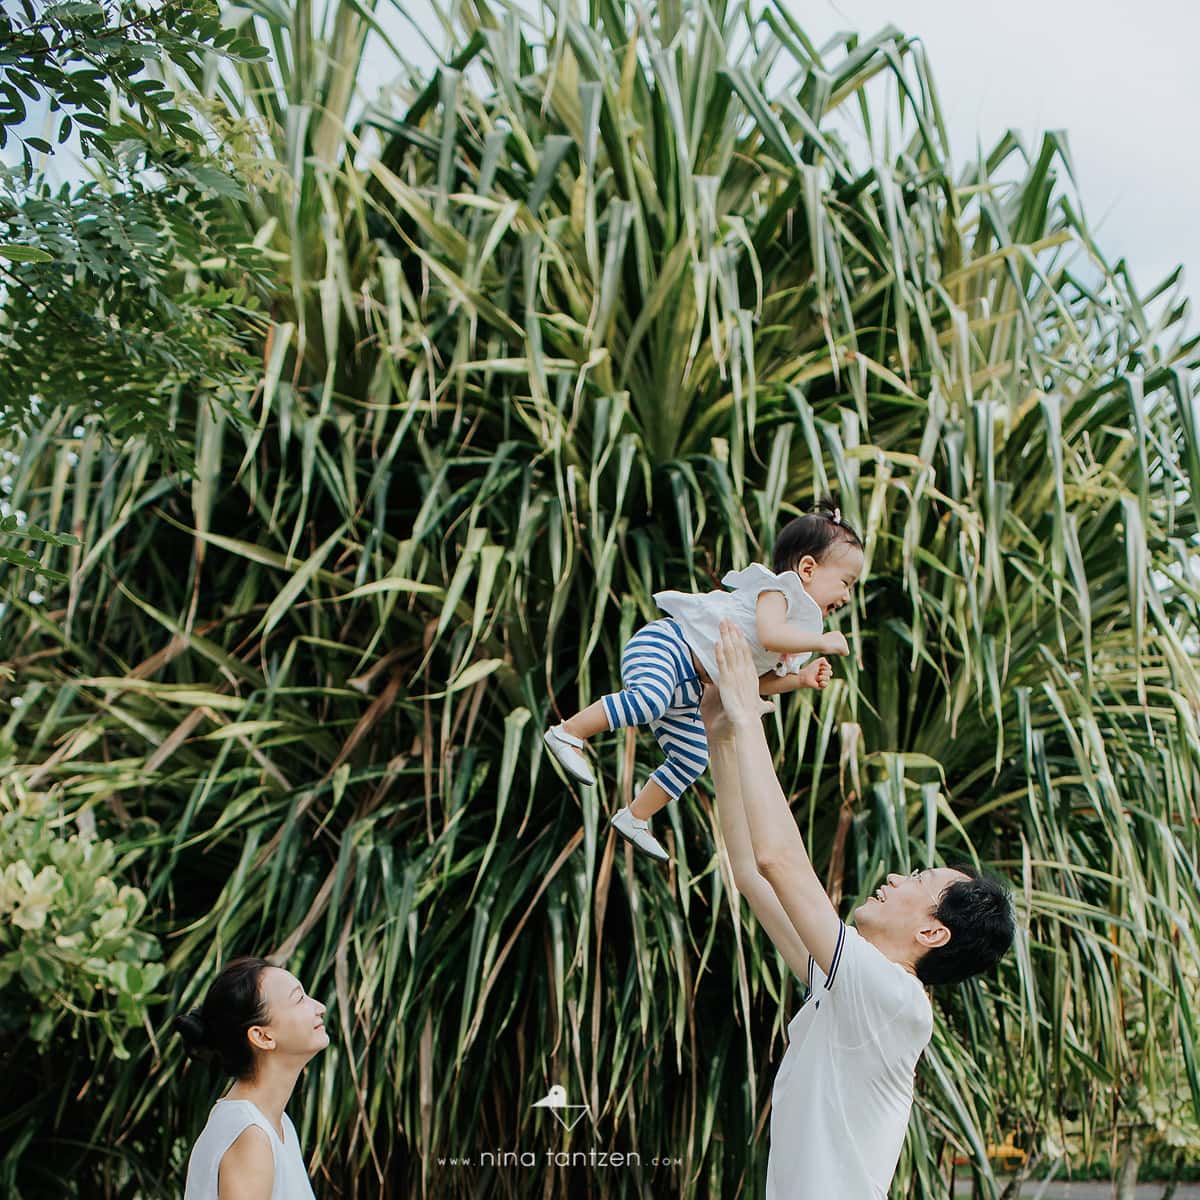 happy family portrait with baby girl outdoors